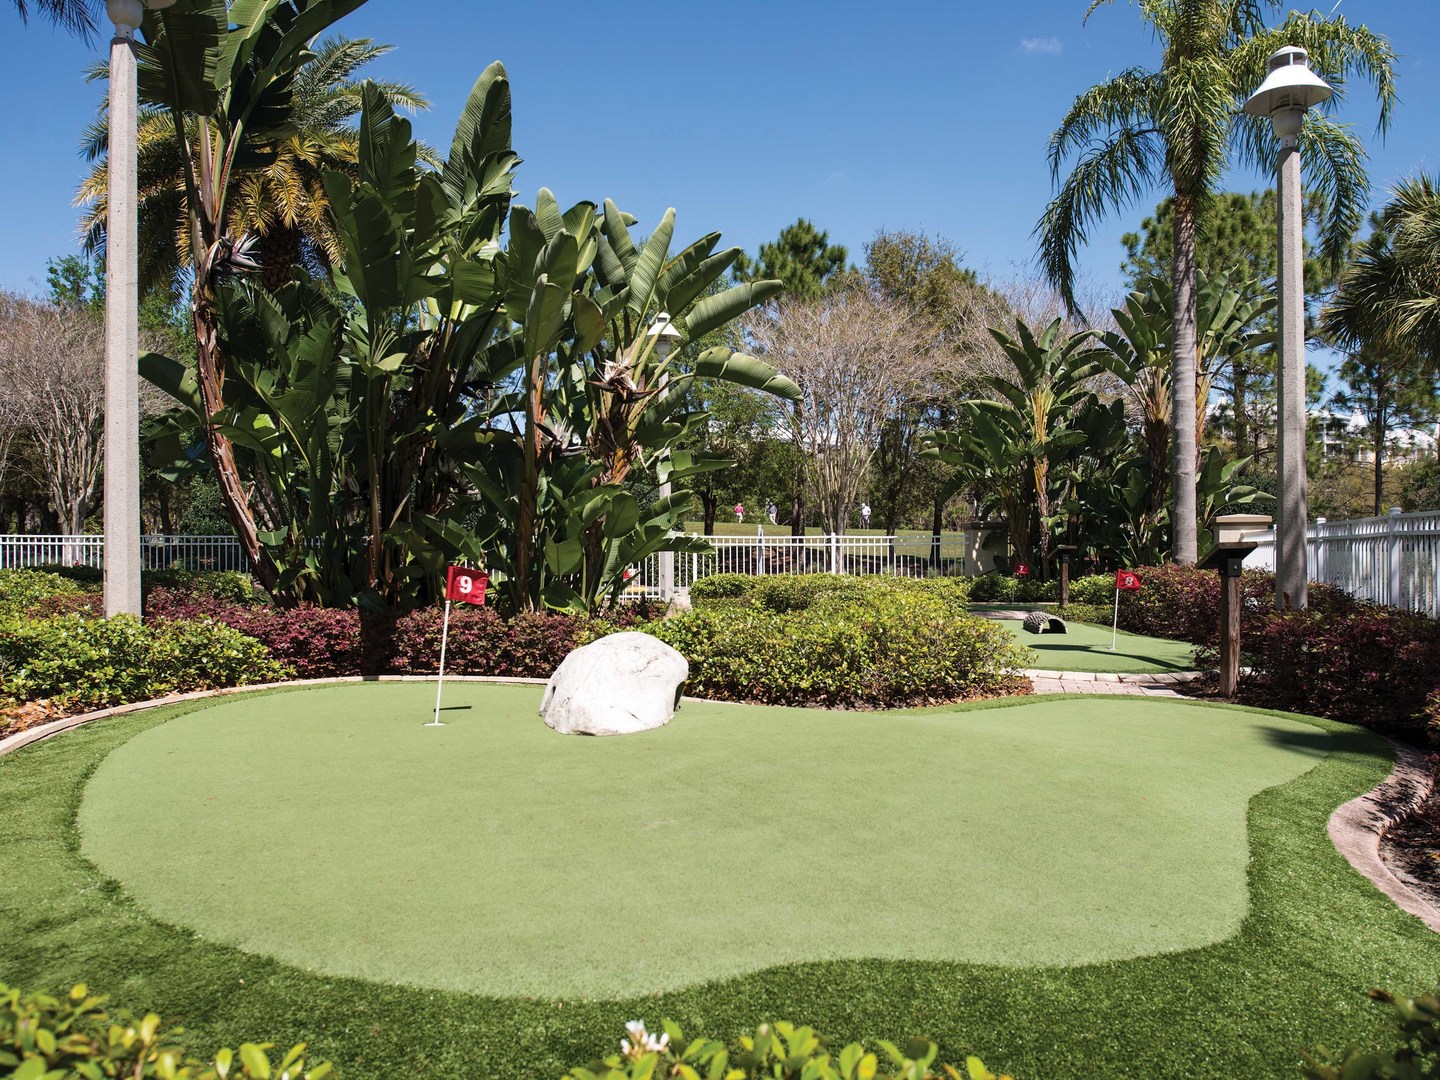 Marriott's Cypress Harbour Mini Golf. Marriott's Cypress Harbour is located in Orlando, Florida United States.